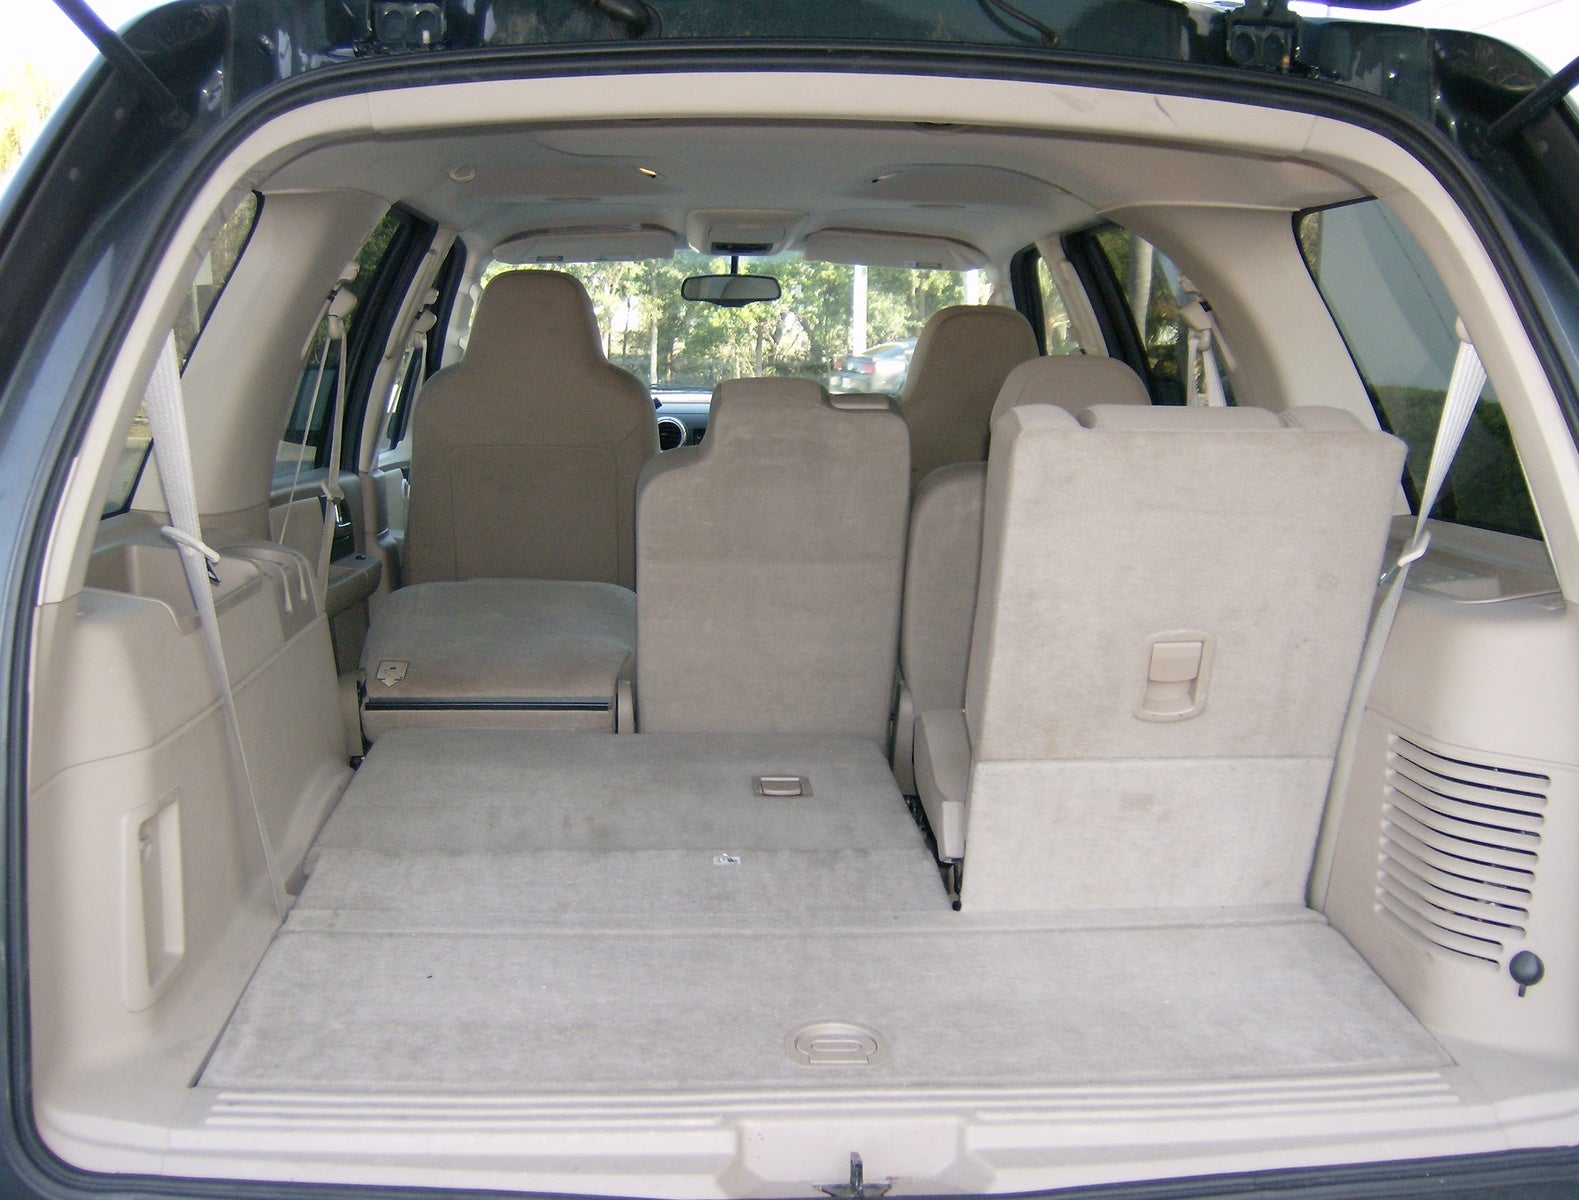 2011 Ford expedition interior dimensions #1